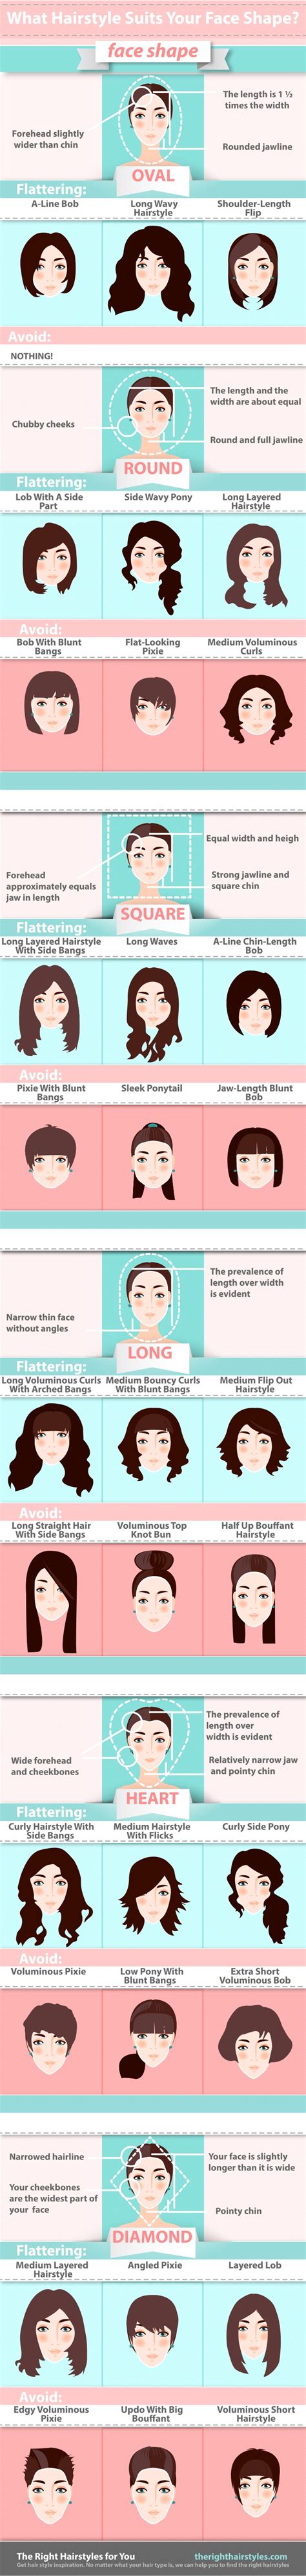 How To Choose A Haircut And Hairstyle According To Your Face Shape